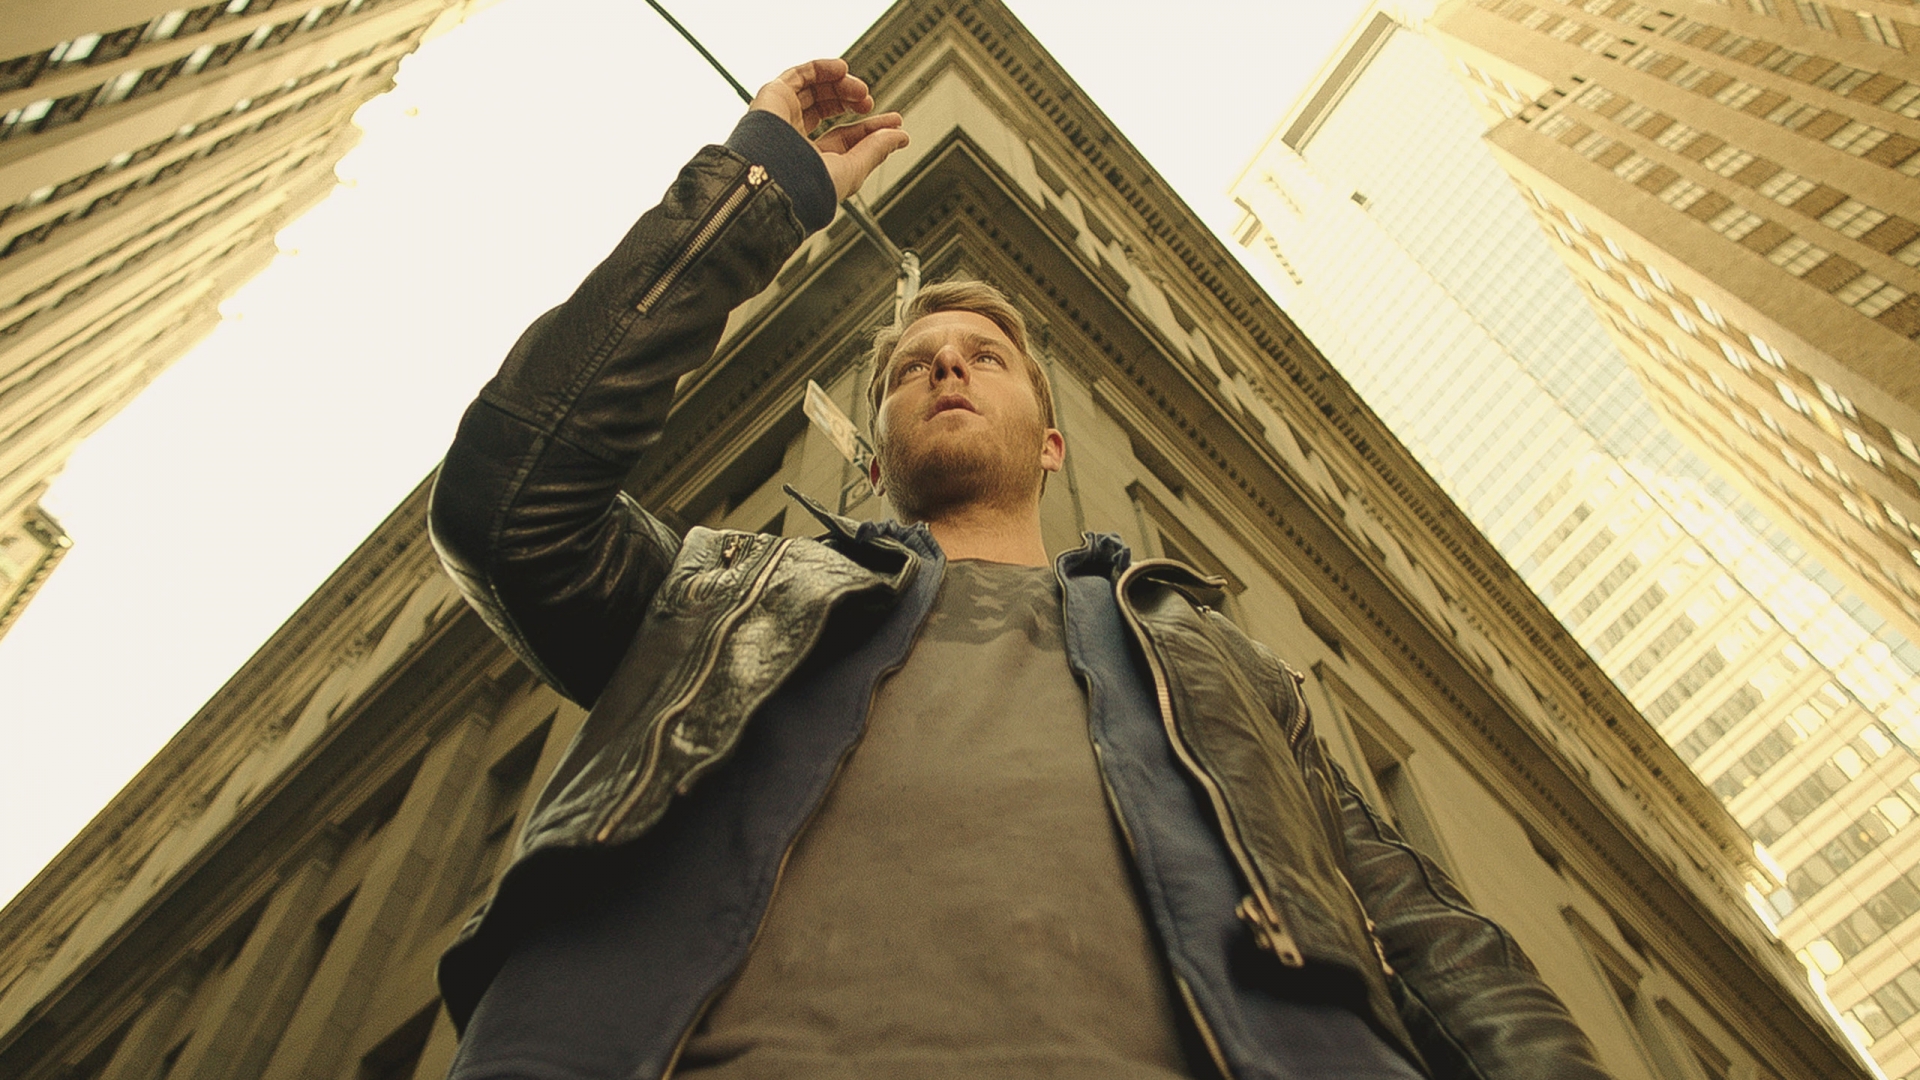 Limitless Brian Finch for 1920 x 1080 HDTV 1080p resolution